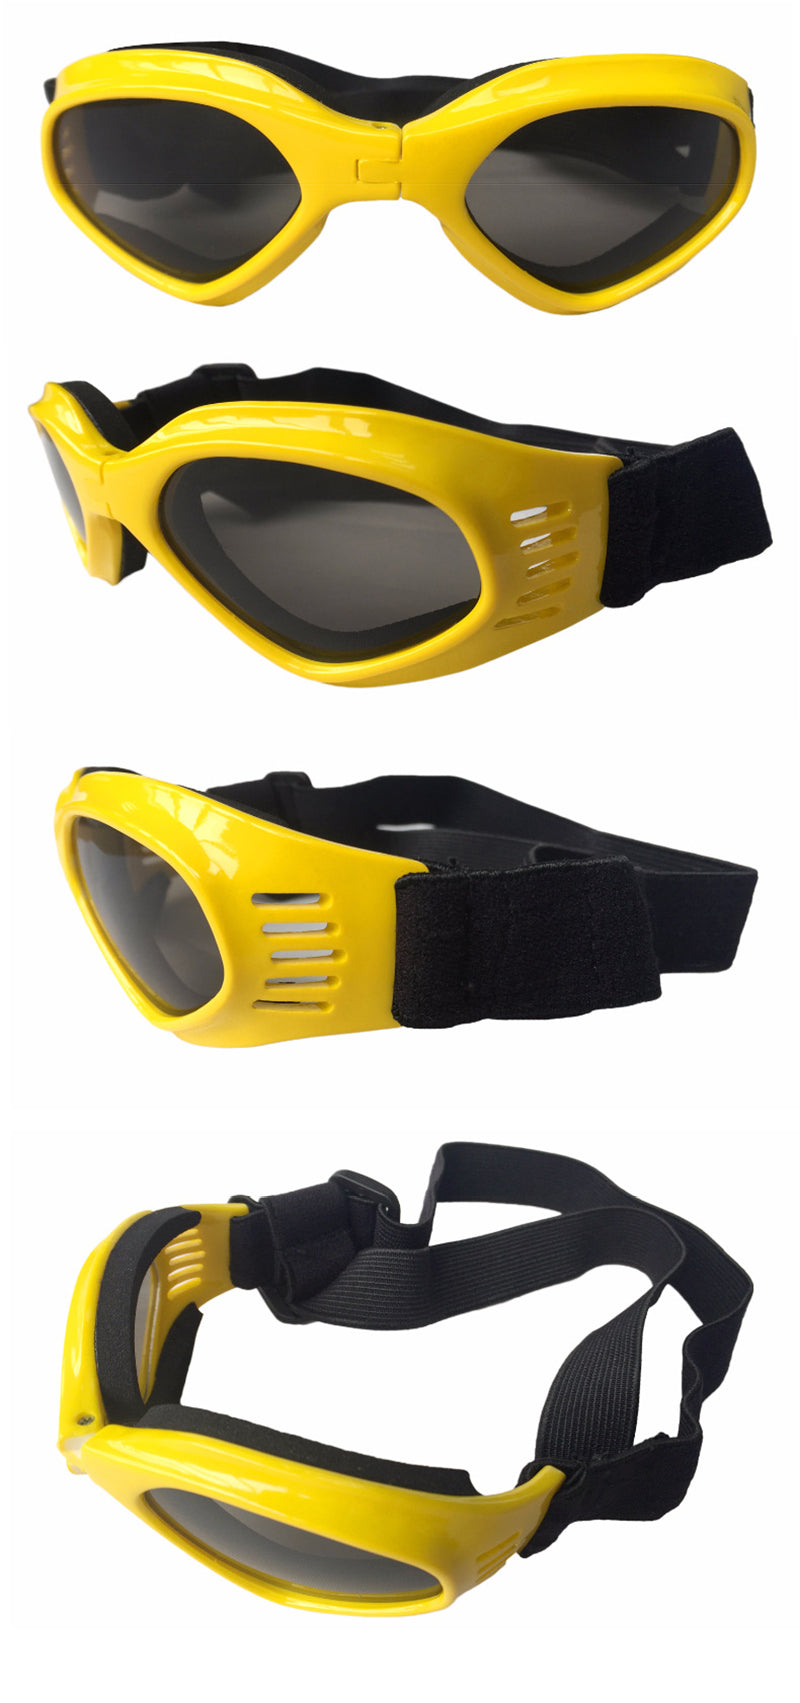 Dog Goggles Sunglasses for Dogs